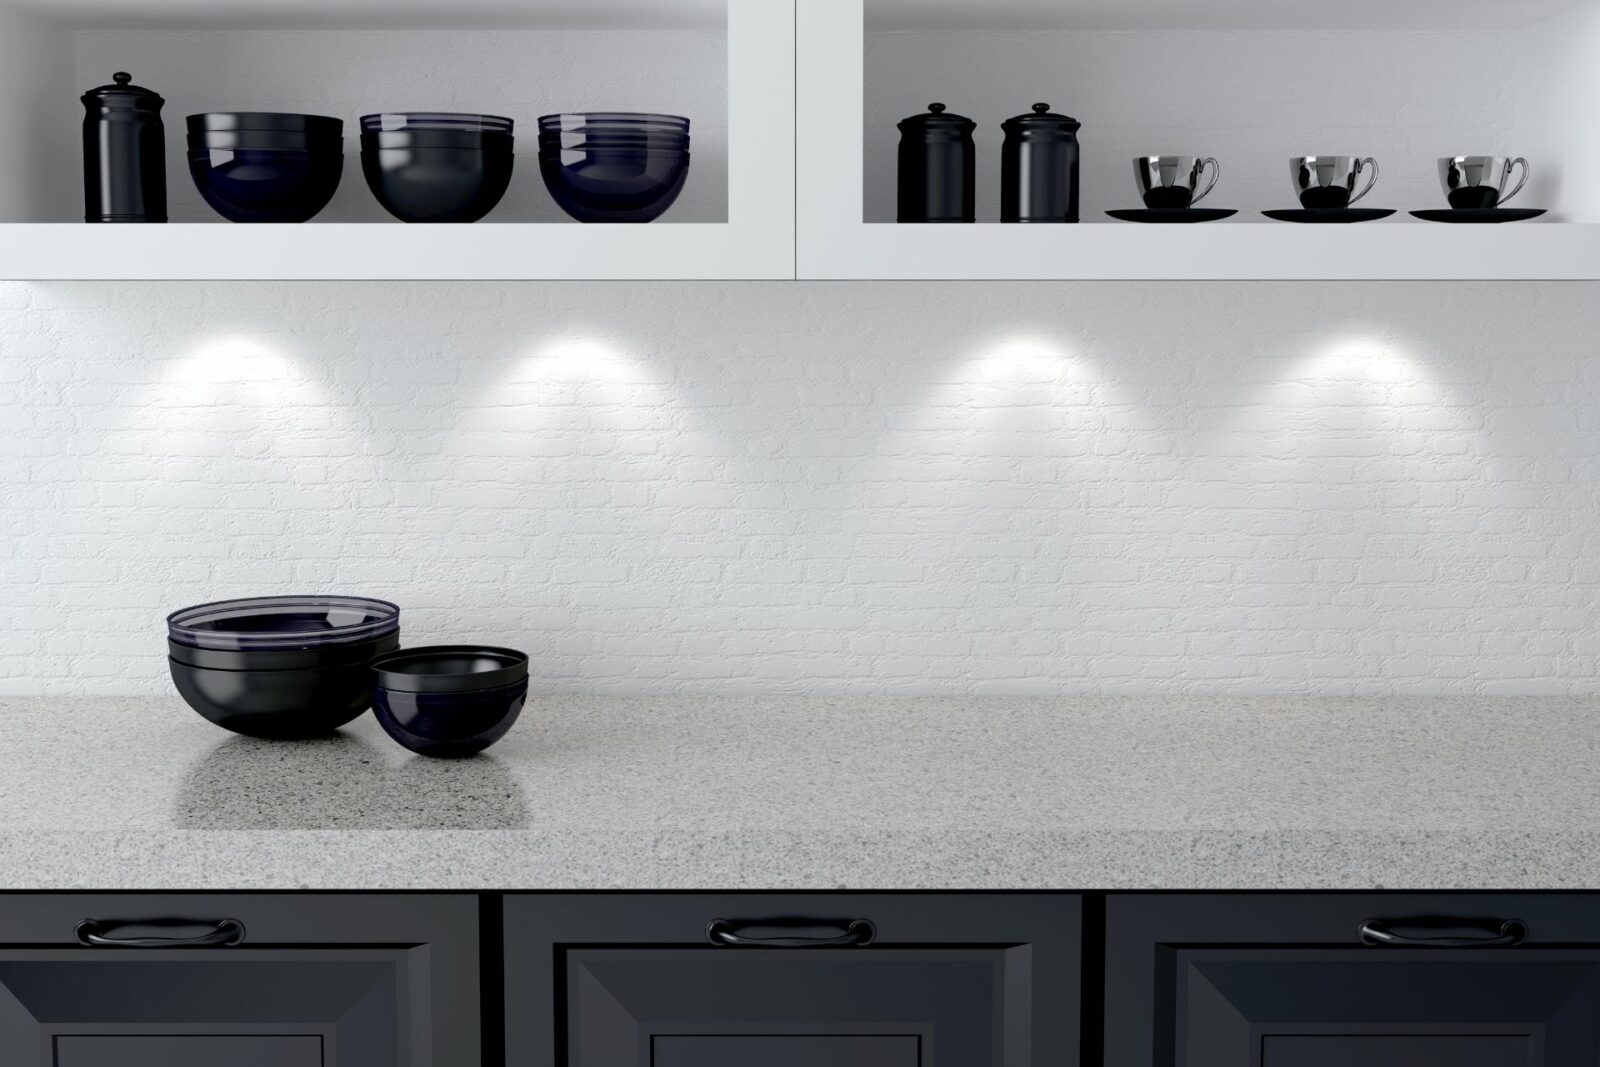 black and white kitchen cabinets